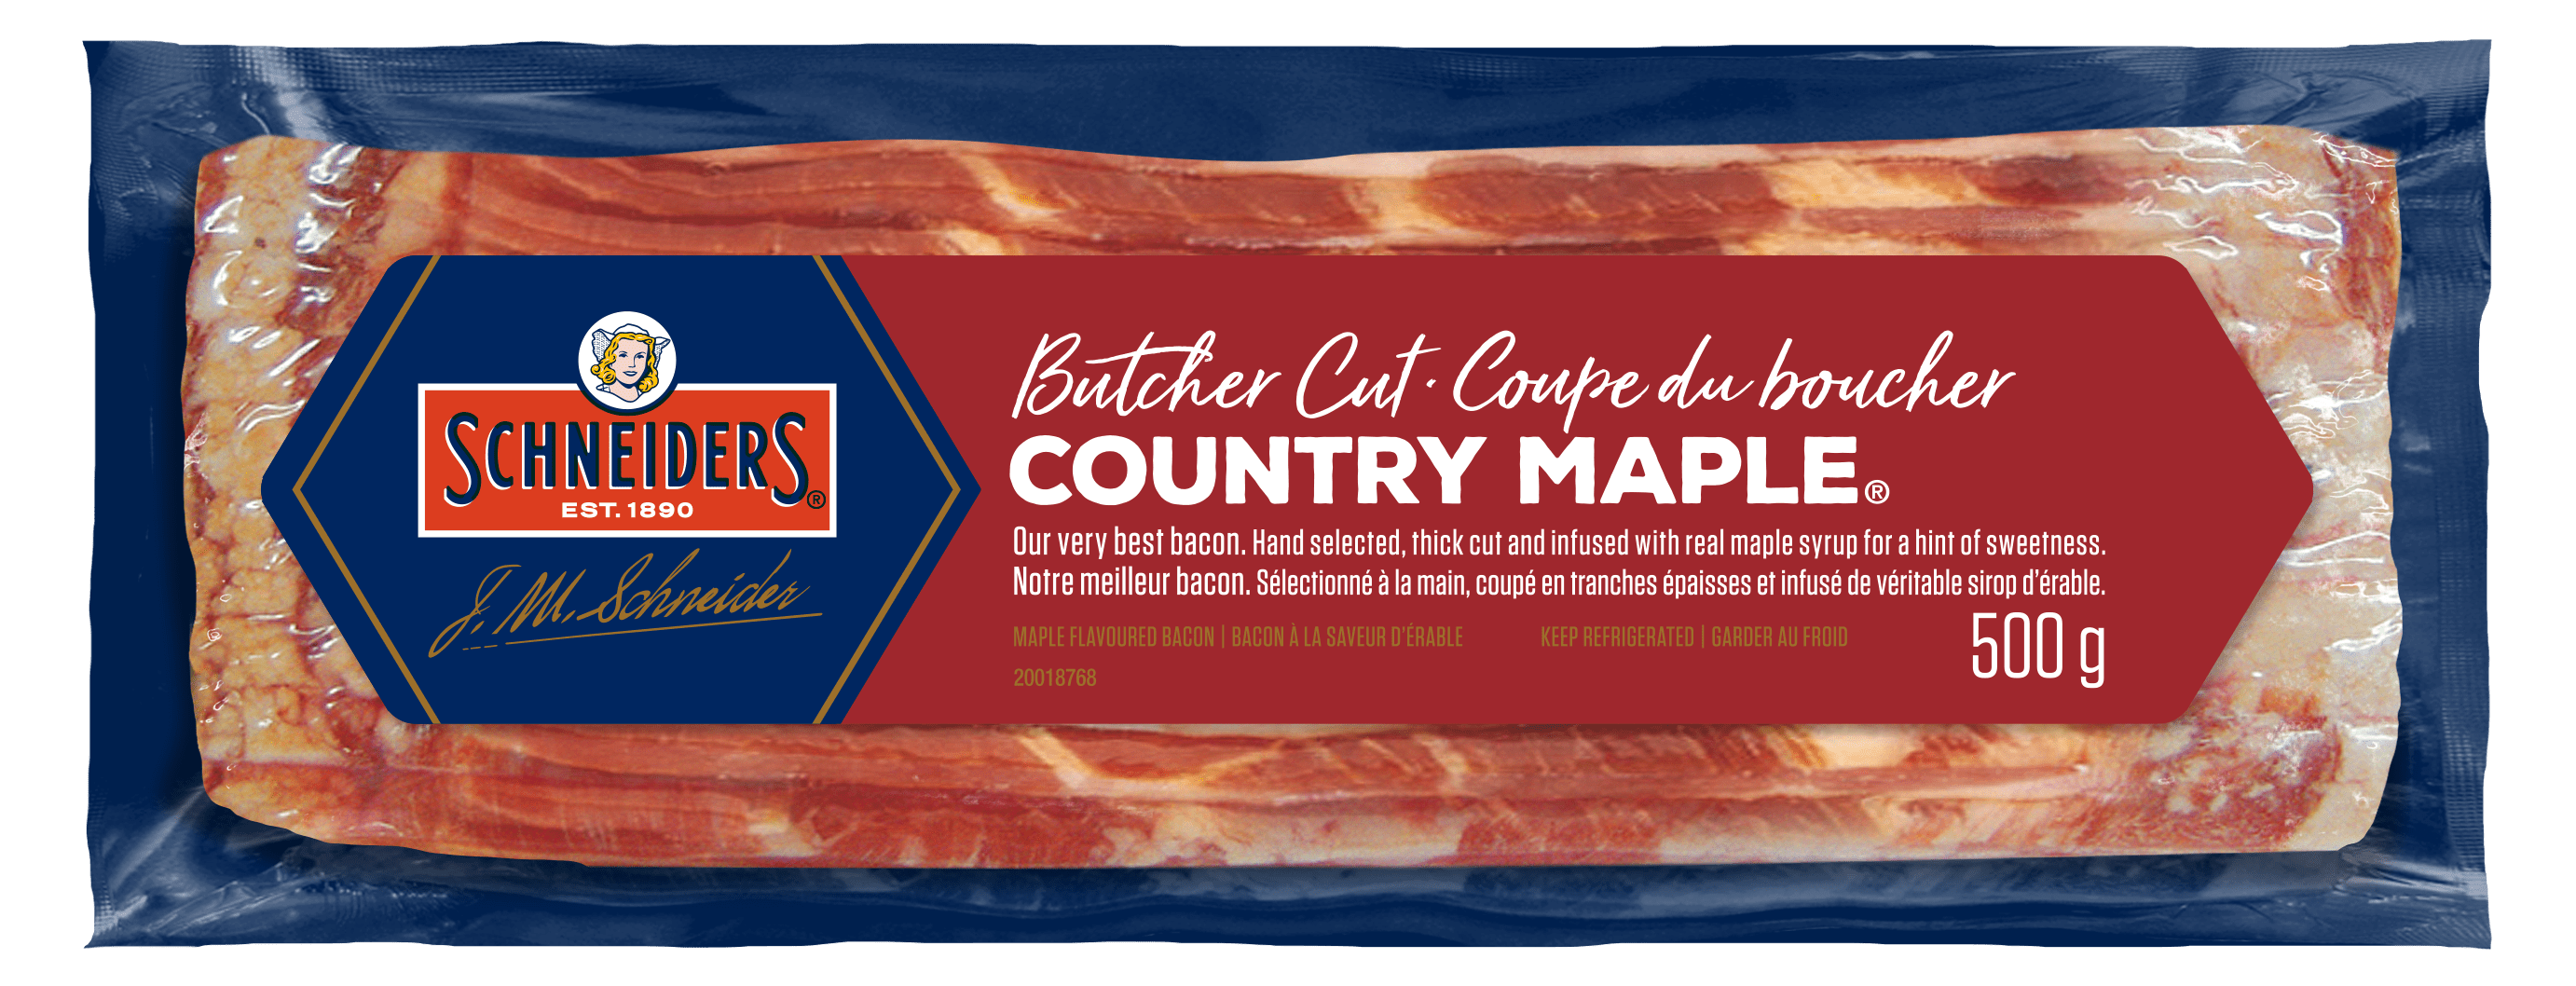 Bacon country maple